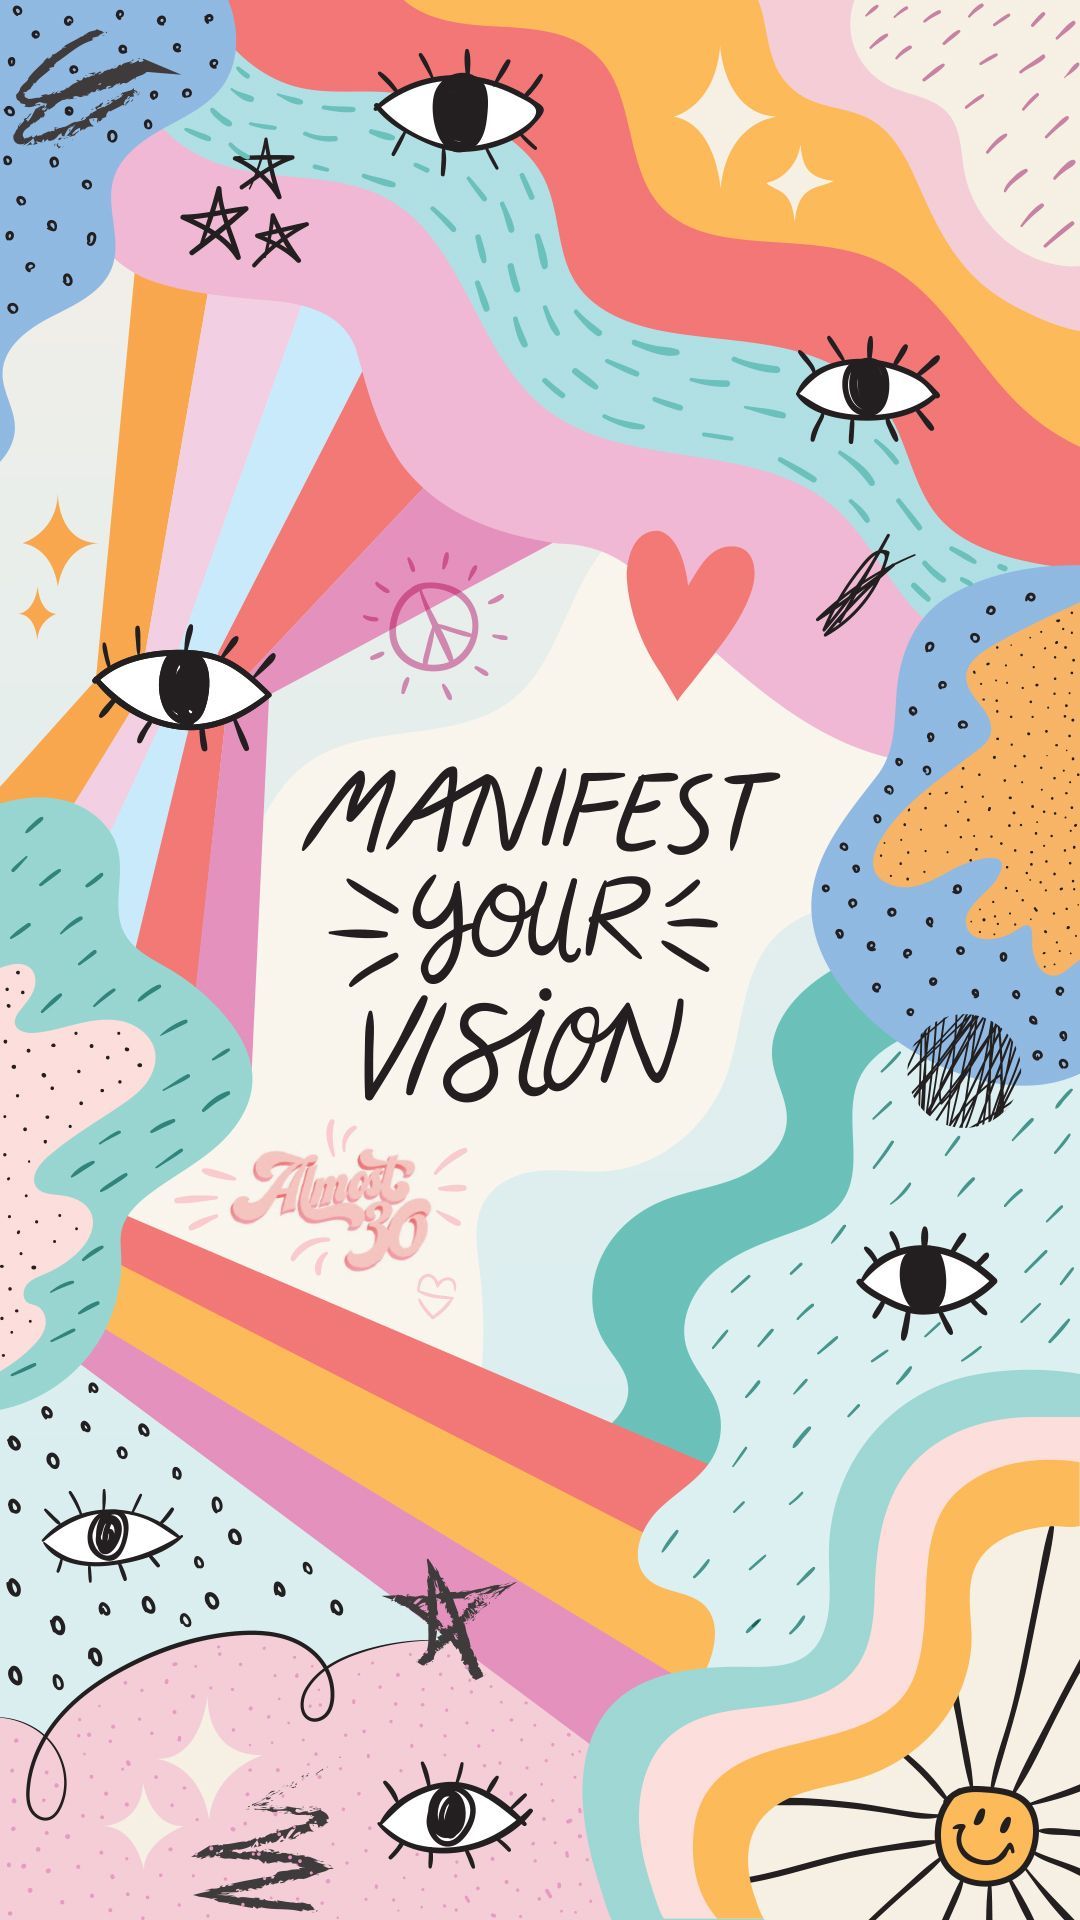 Manifest Your Vision. iPhone background wallpaper, Cute patterns wallpaper, Pretty wallpaper